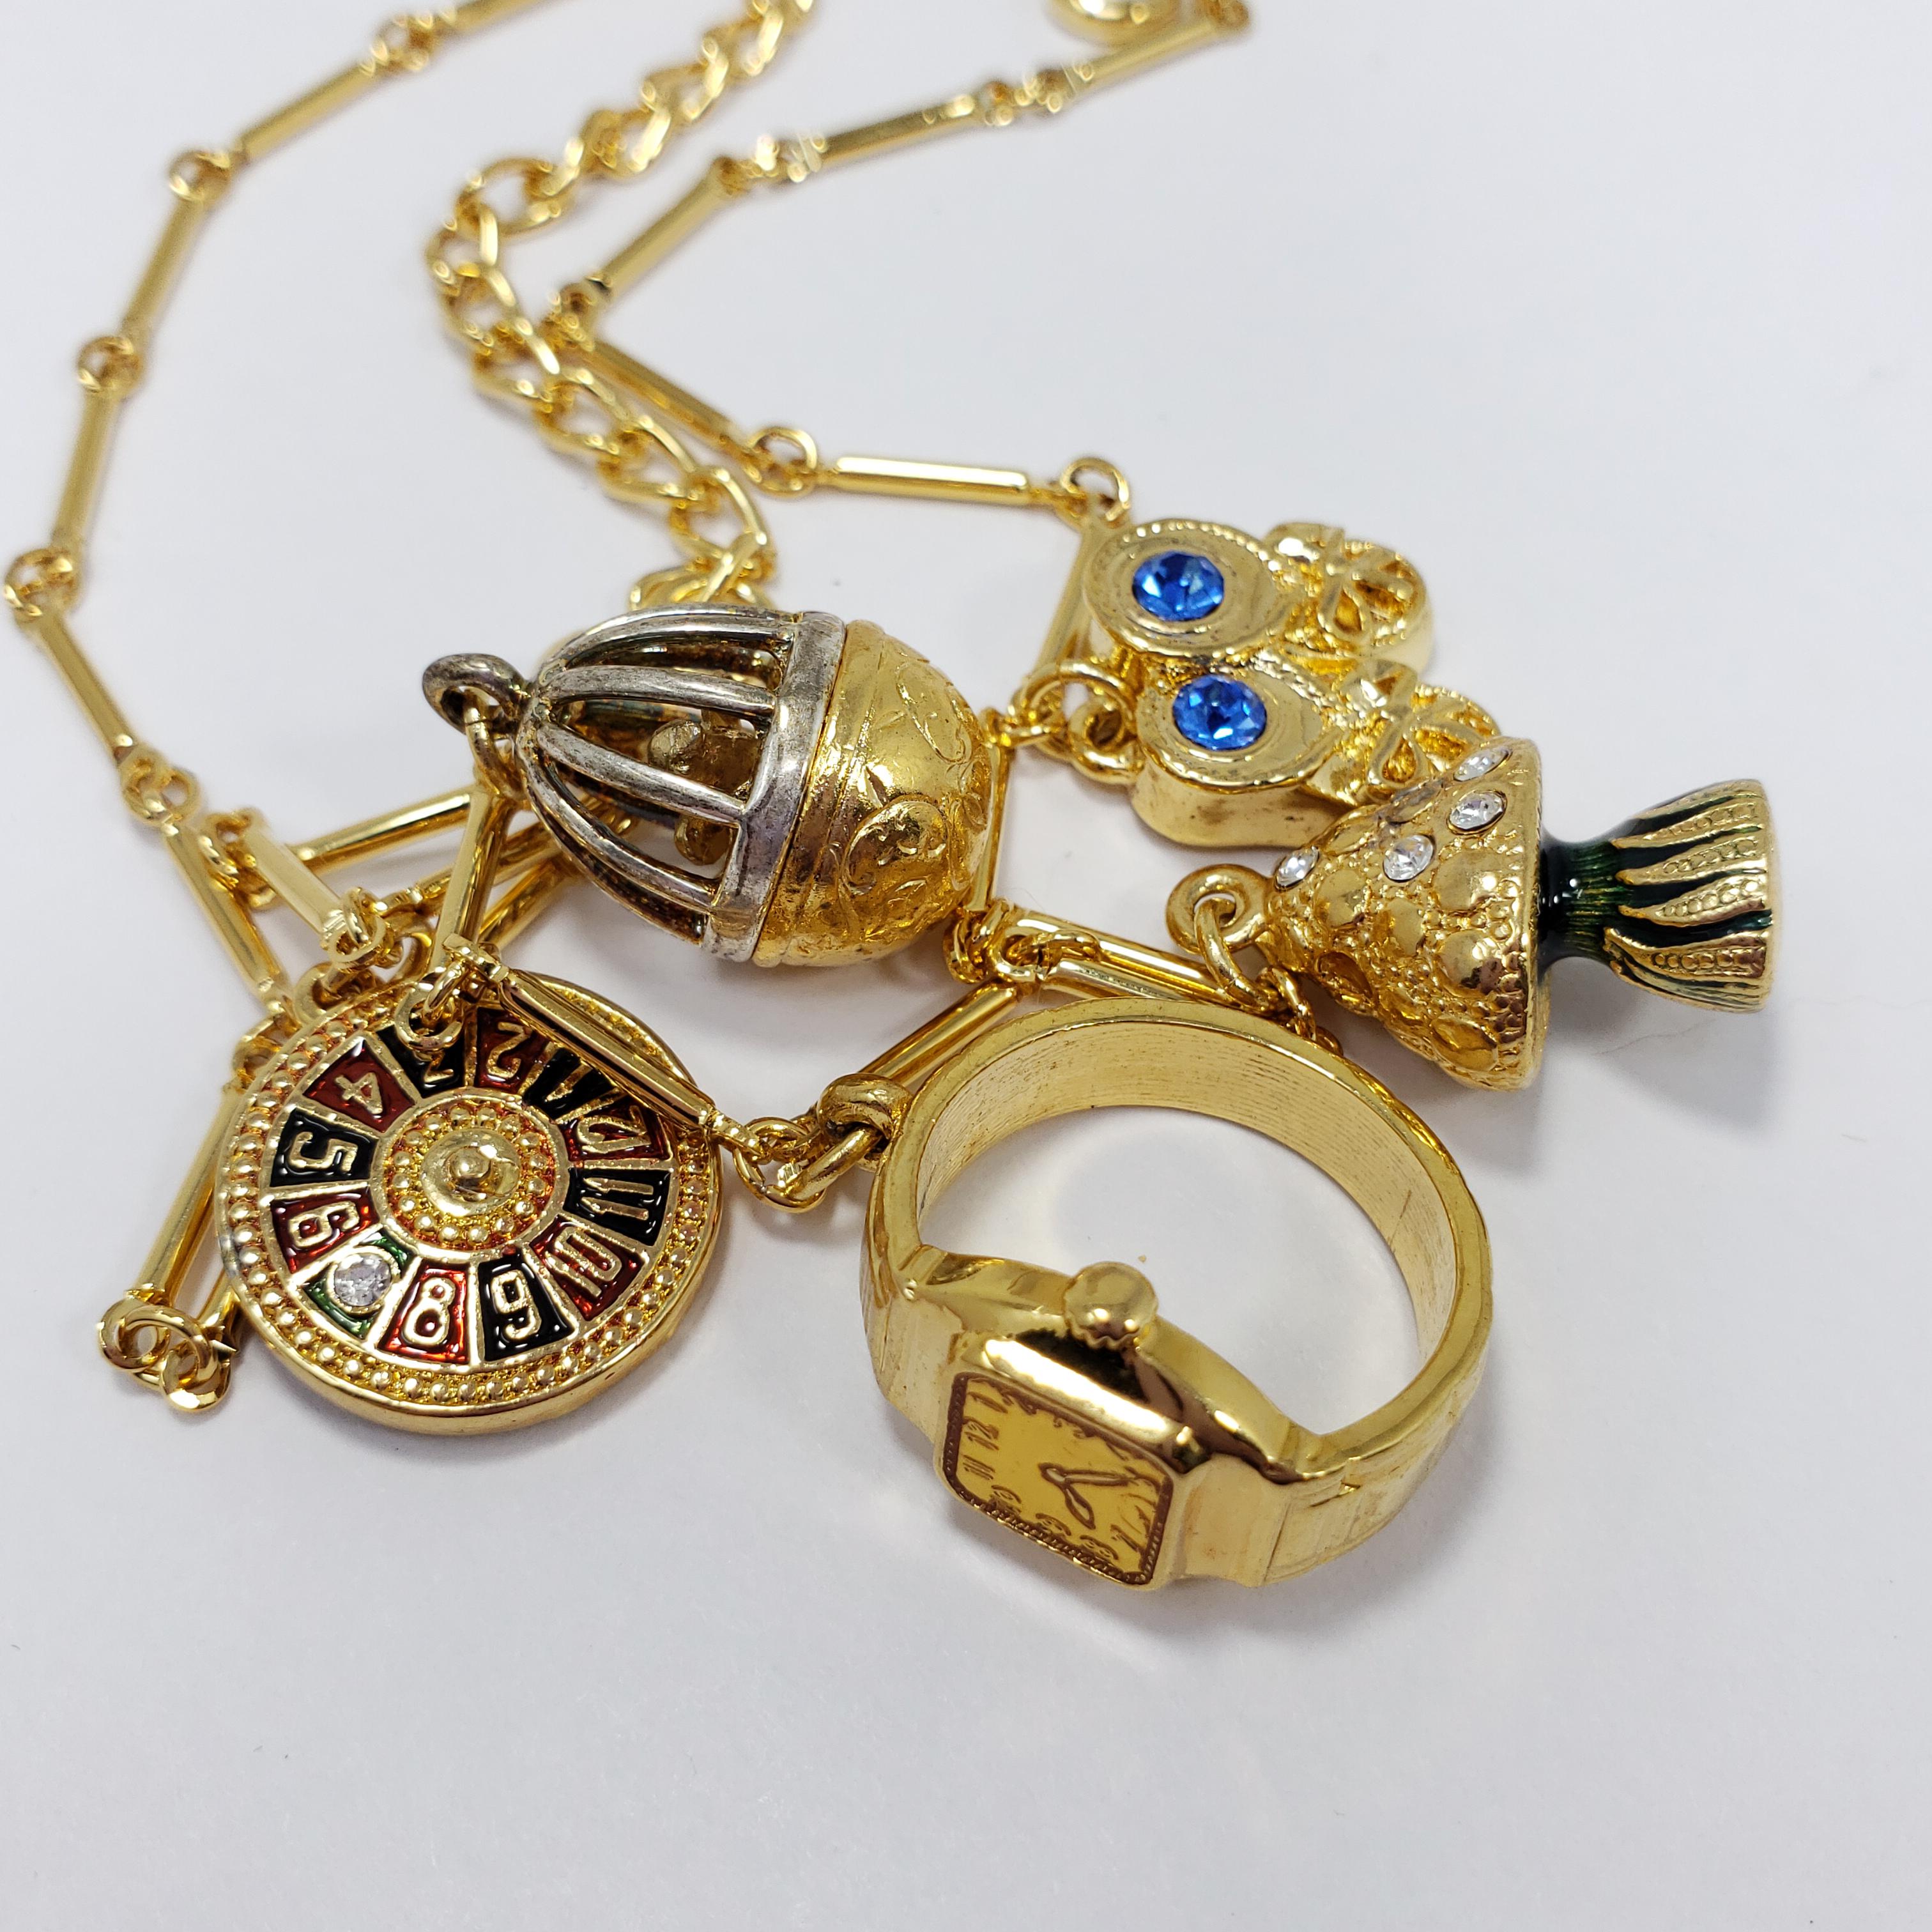 A quirky necklace by Kenneth Jay Lane. Features five charms - a roulette wheel, a birdcage, a ring, a tree, and a pair of shoes. Motifs are decorated with subtle crystal and enamel accents. 

Hallmarks: Kenneth © Lane
43.5cm plus 7.5cm extension